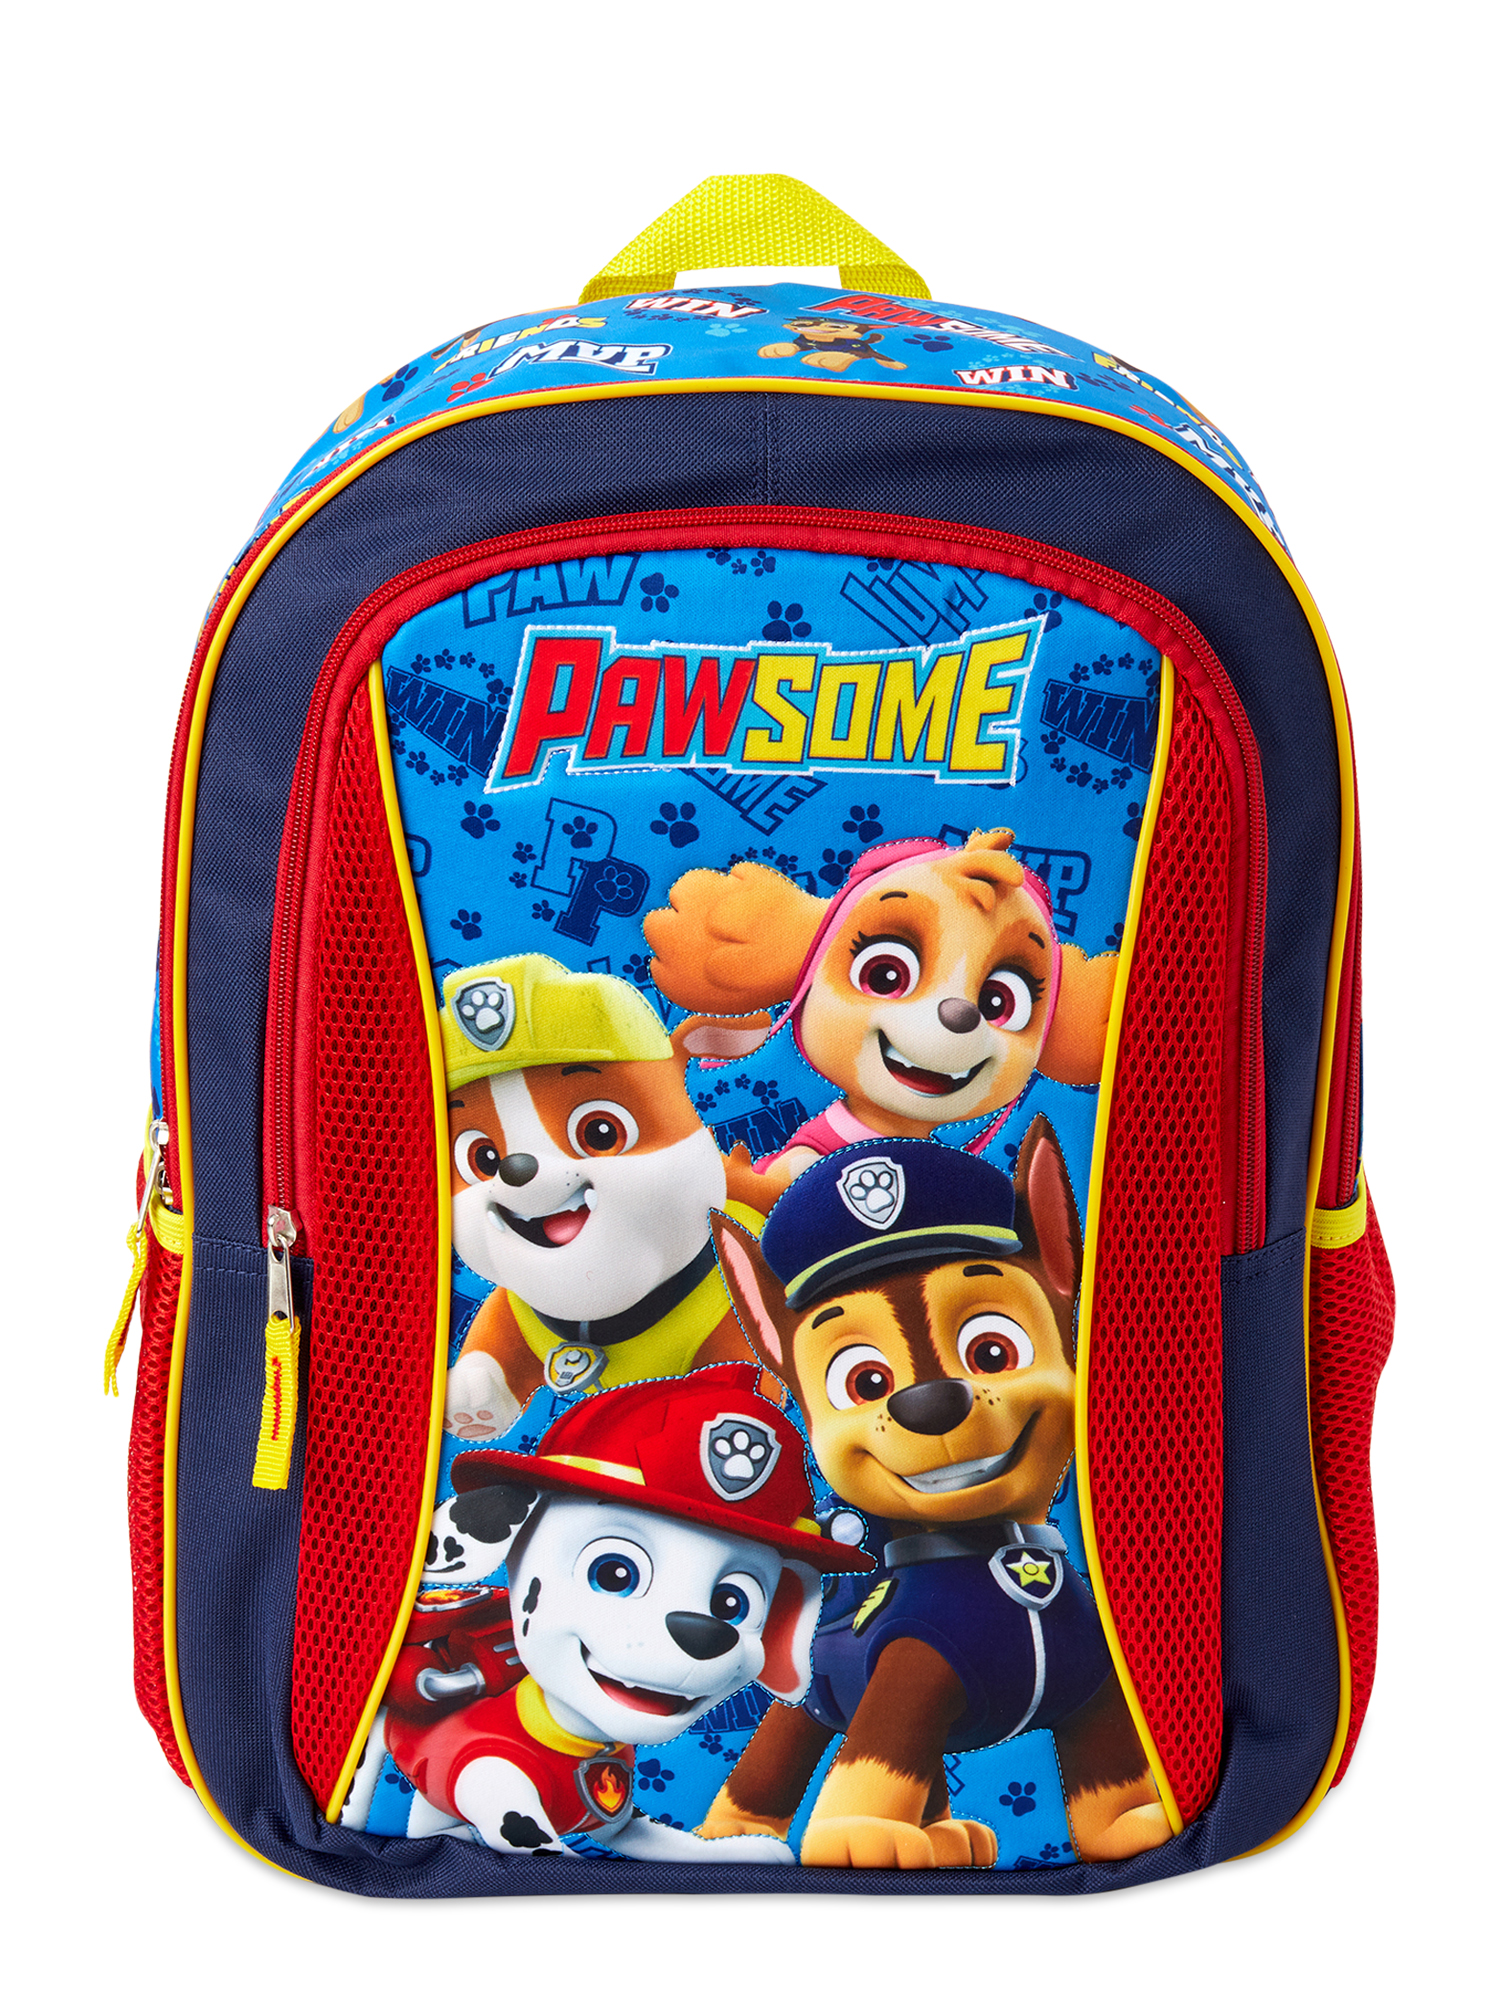 Paw Patrol Pawsome Backpack - image 1 of 6